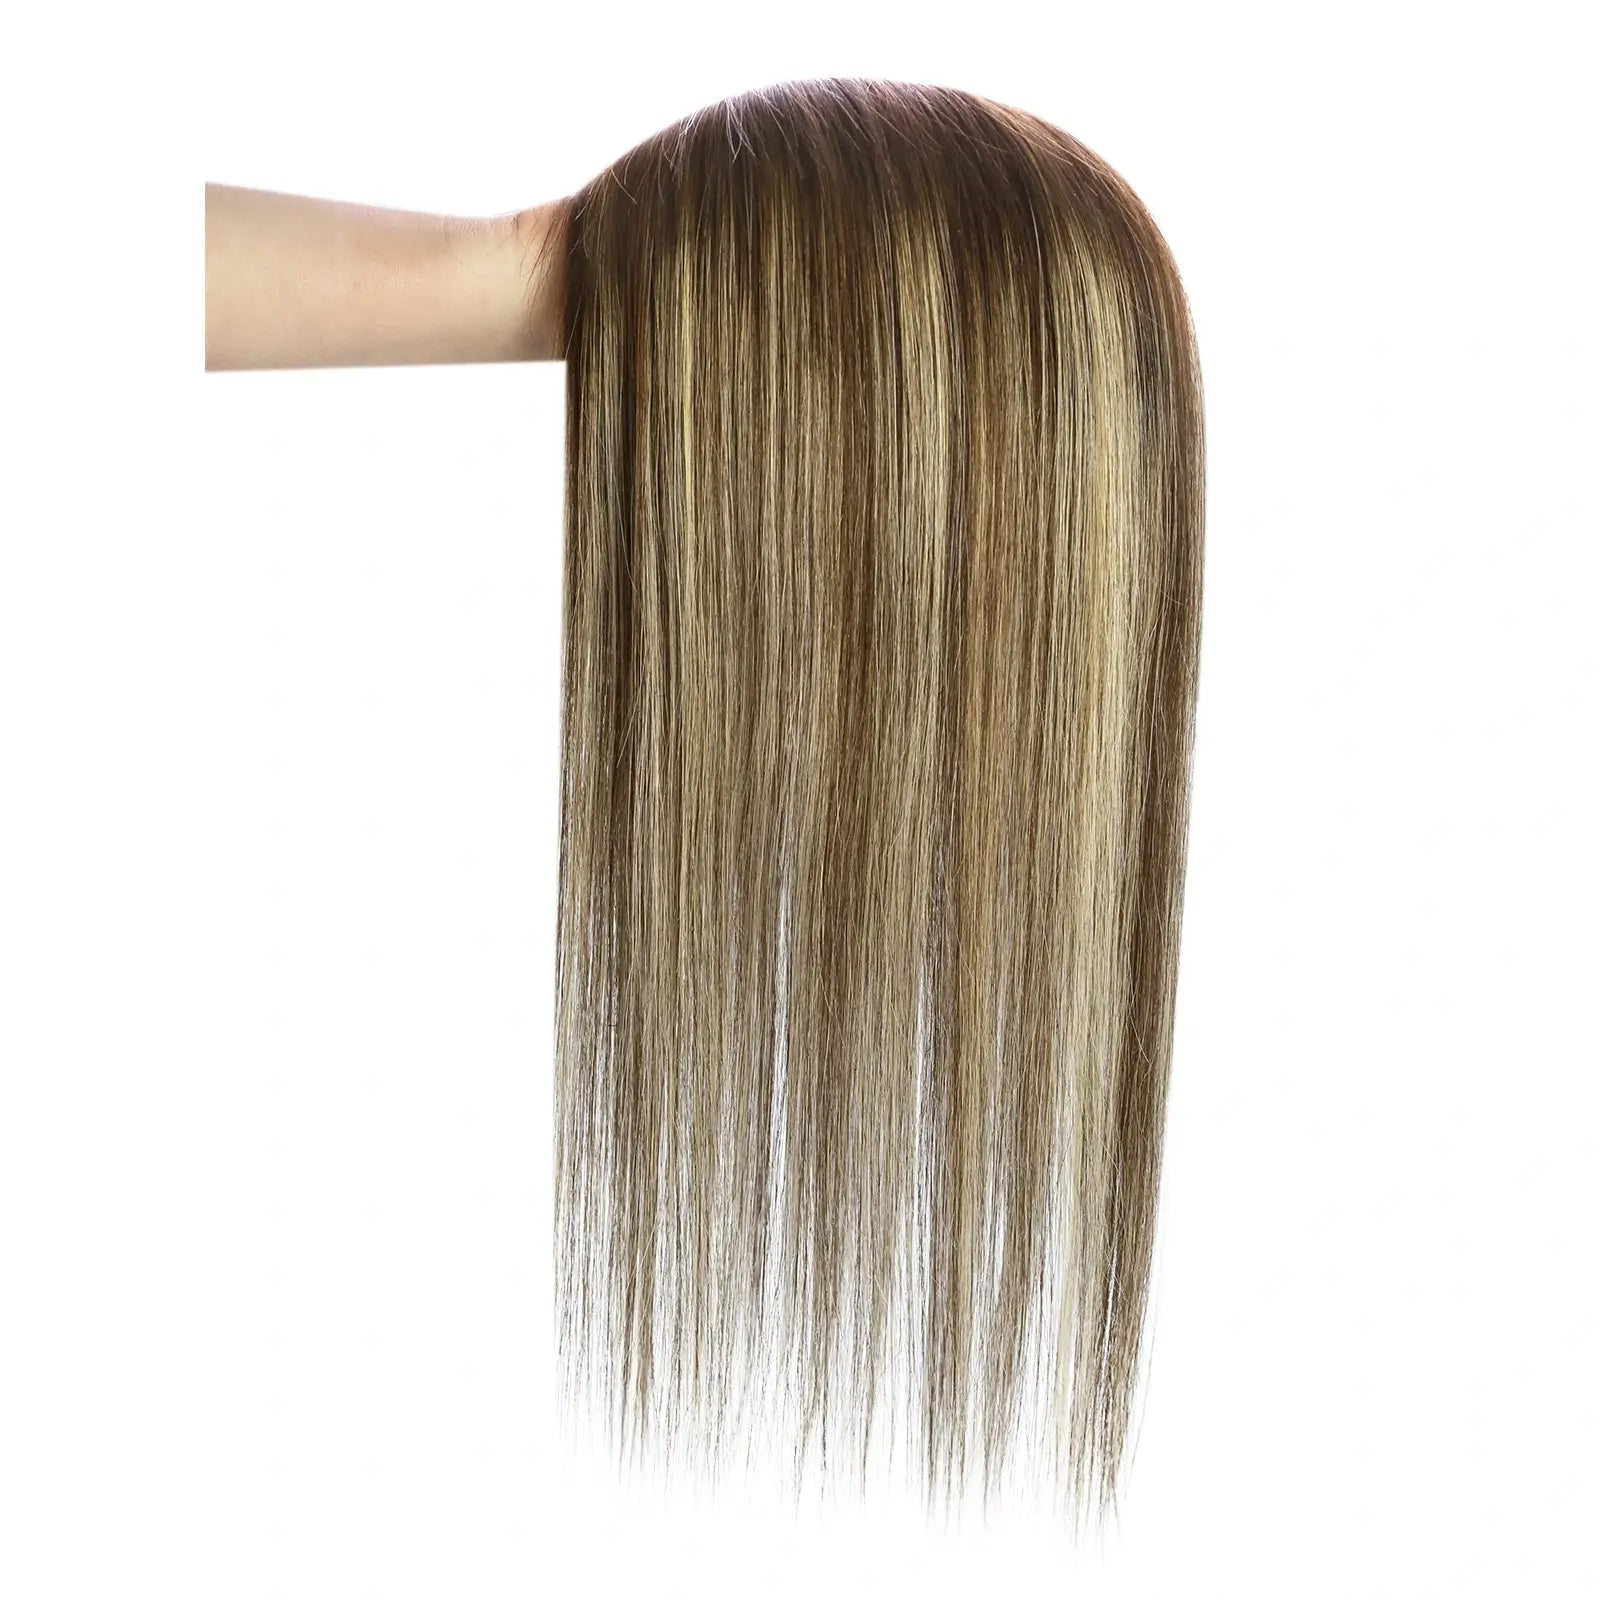 Balayage color Topper Hairpiece for women